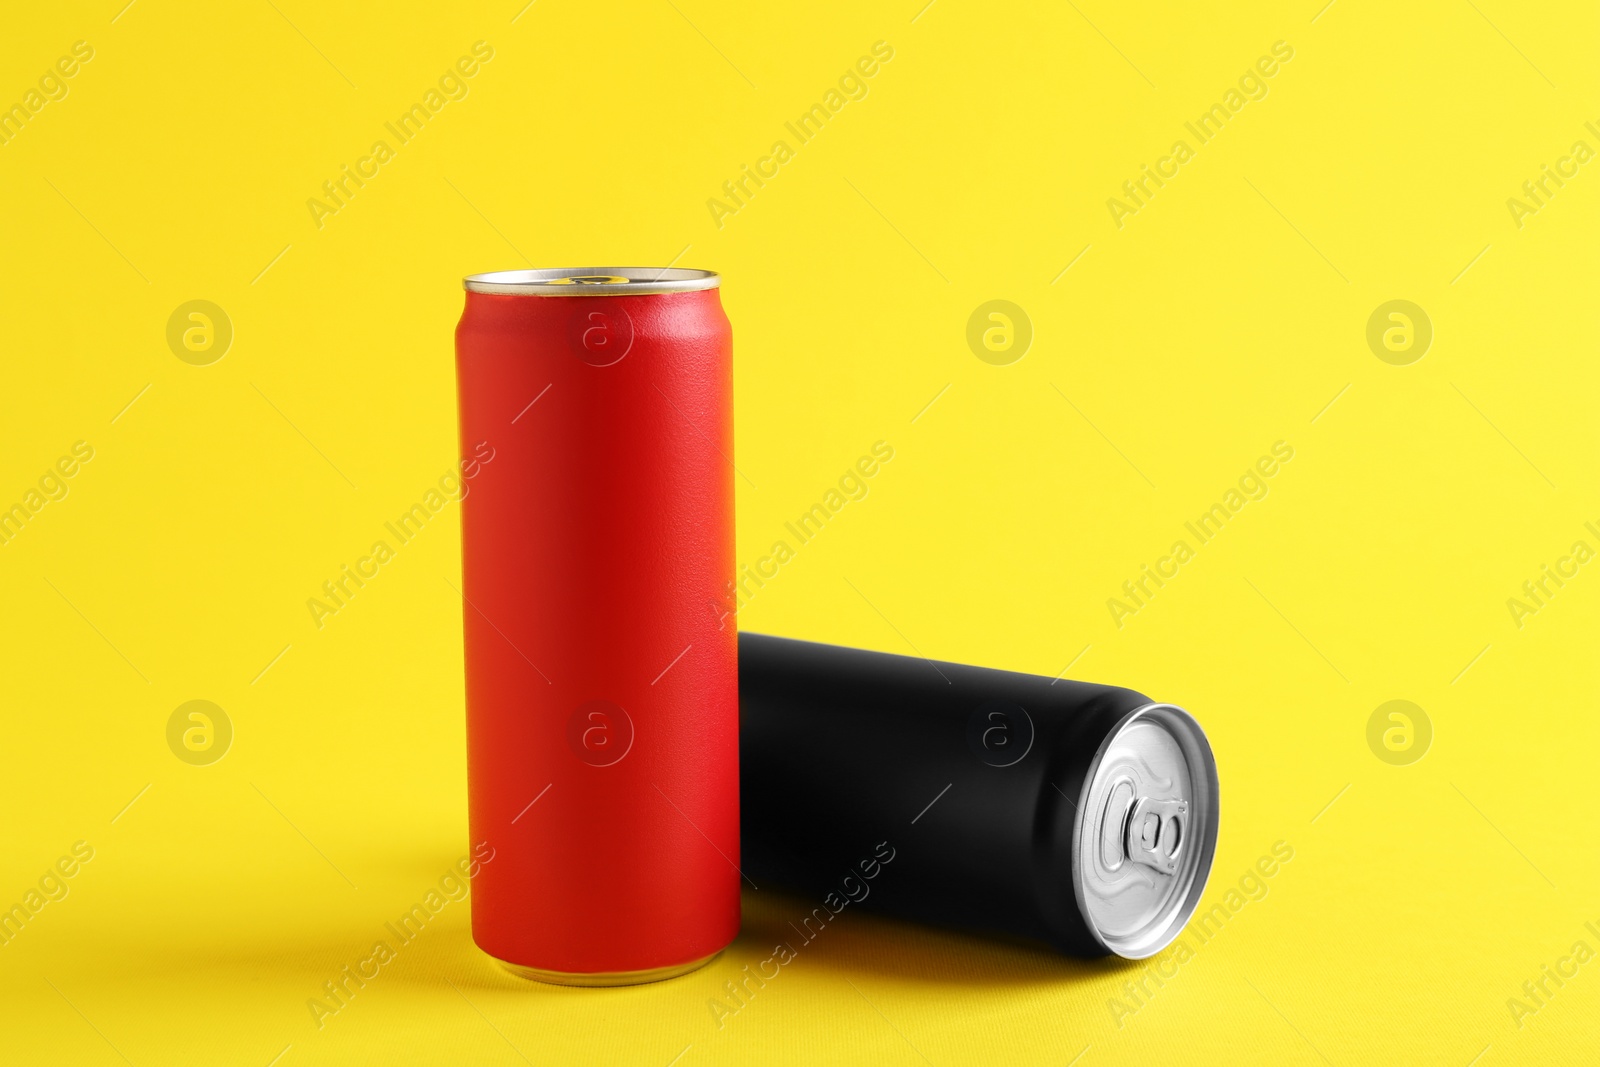 Photo of Energy drinks in colorful cans on yellow background